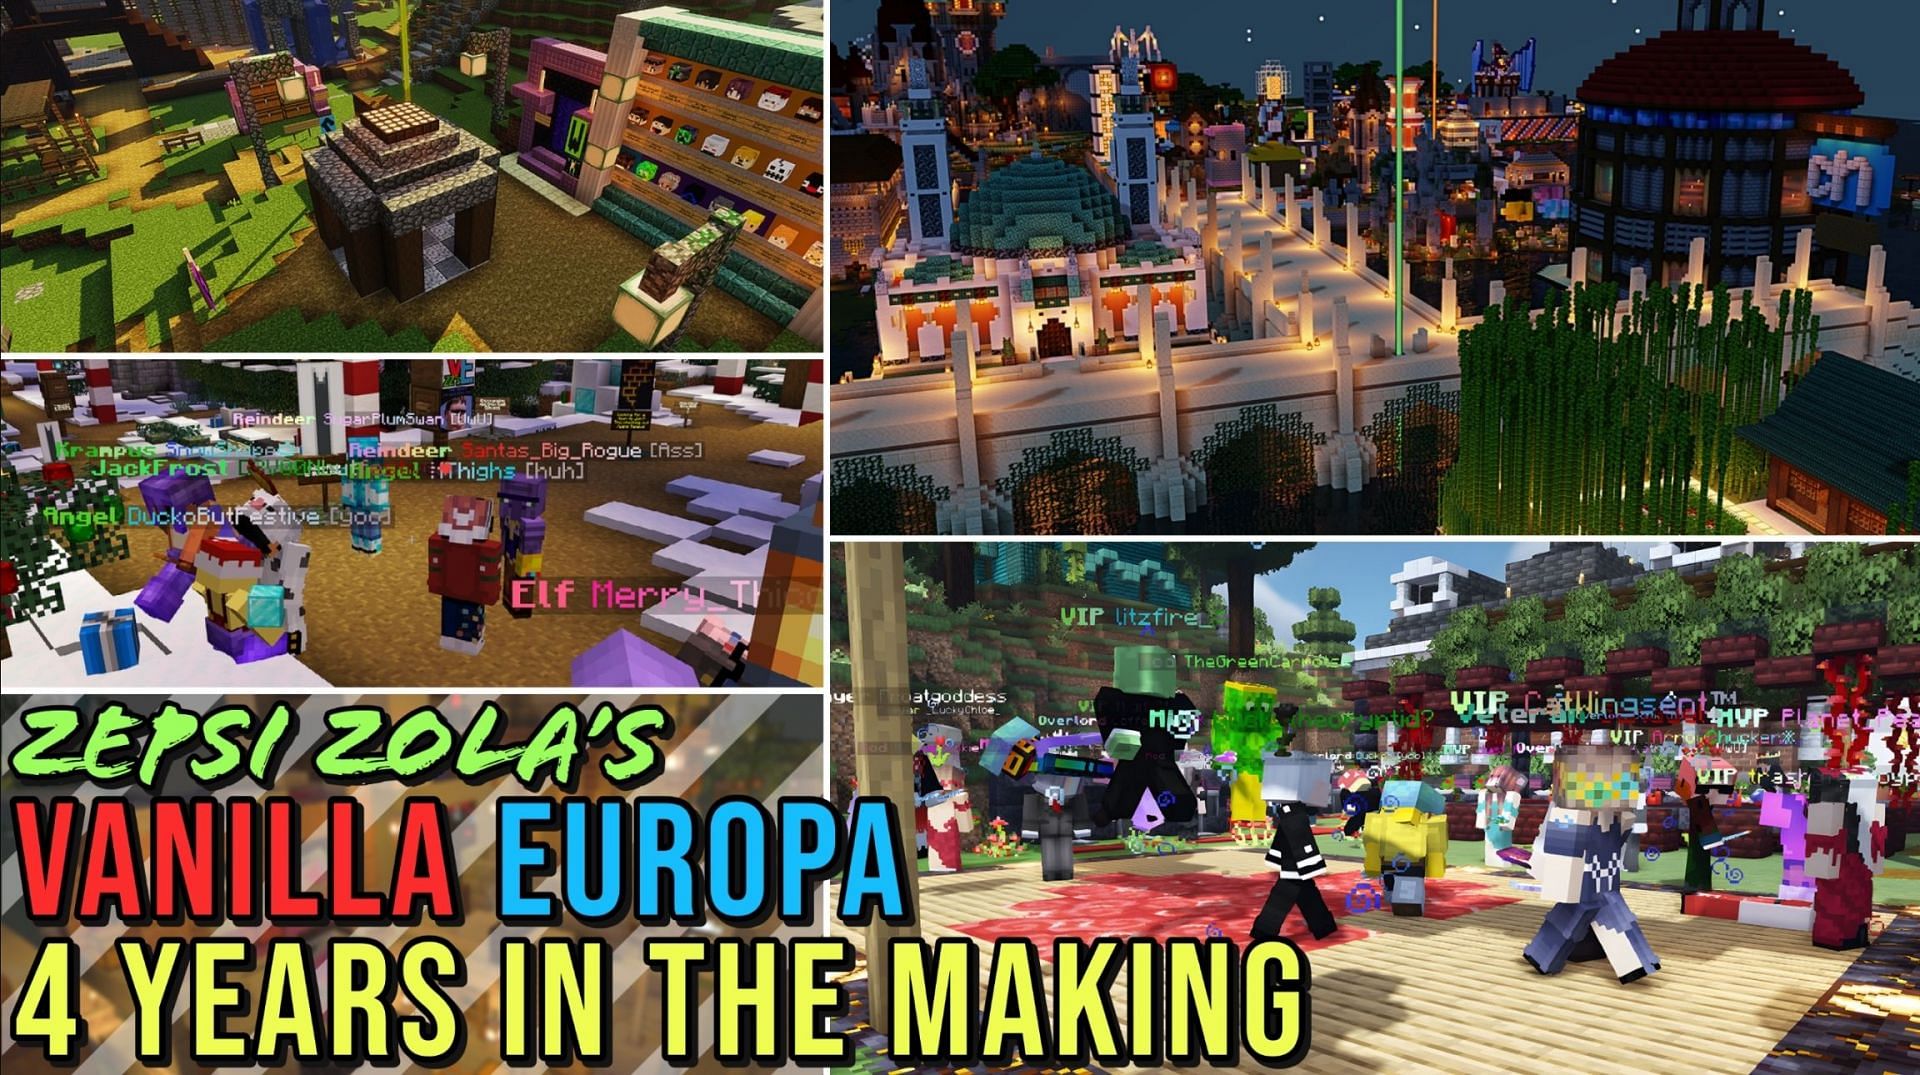 Vanilla Europa is a superb server for any Europe-based player (Image via Vanilla Europa)